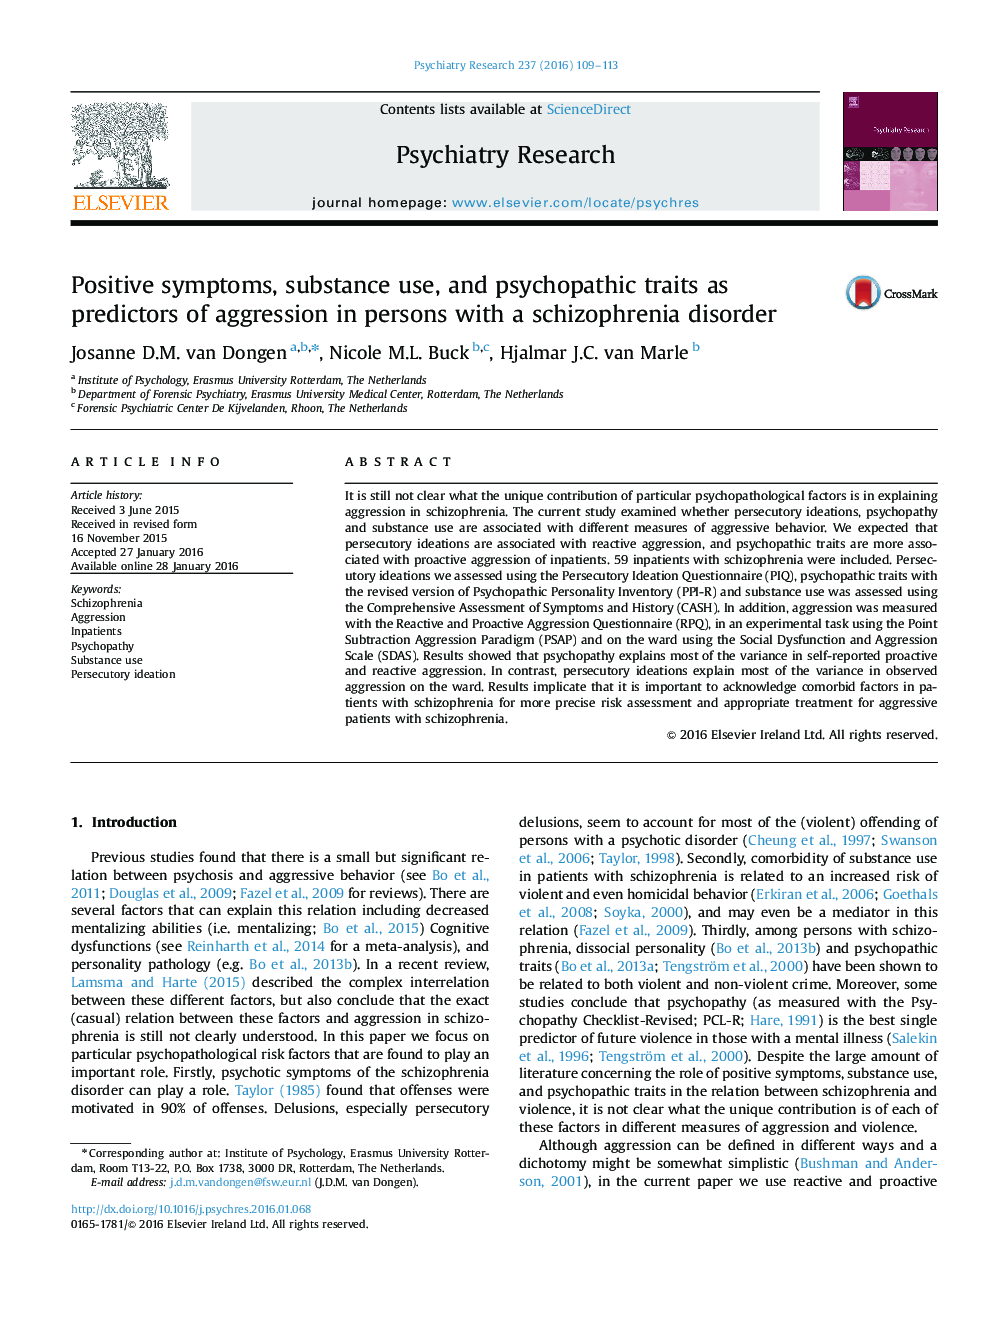 Positive symptoms, substance use, and psychopathic traits as predictors of aggression in persons with a schizophrenia disorder